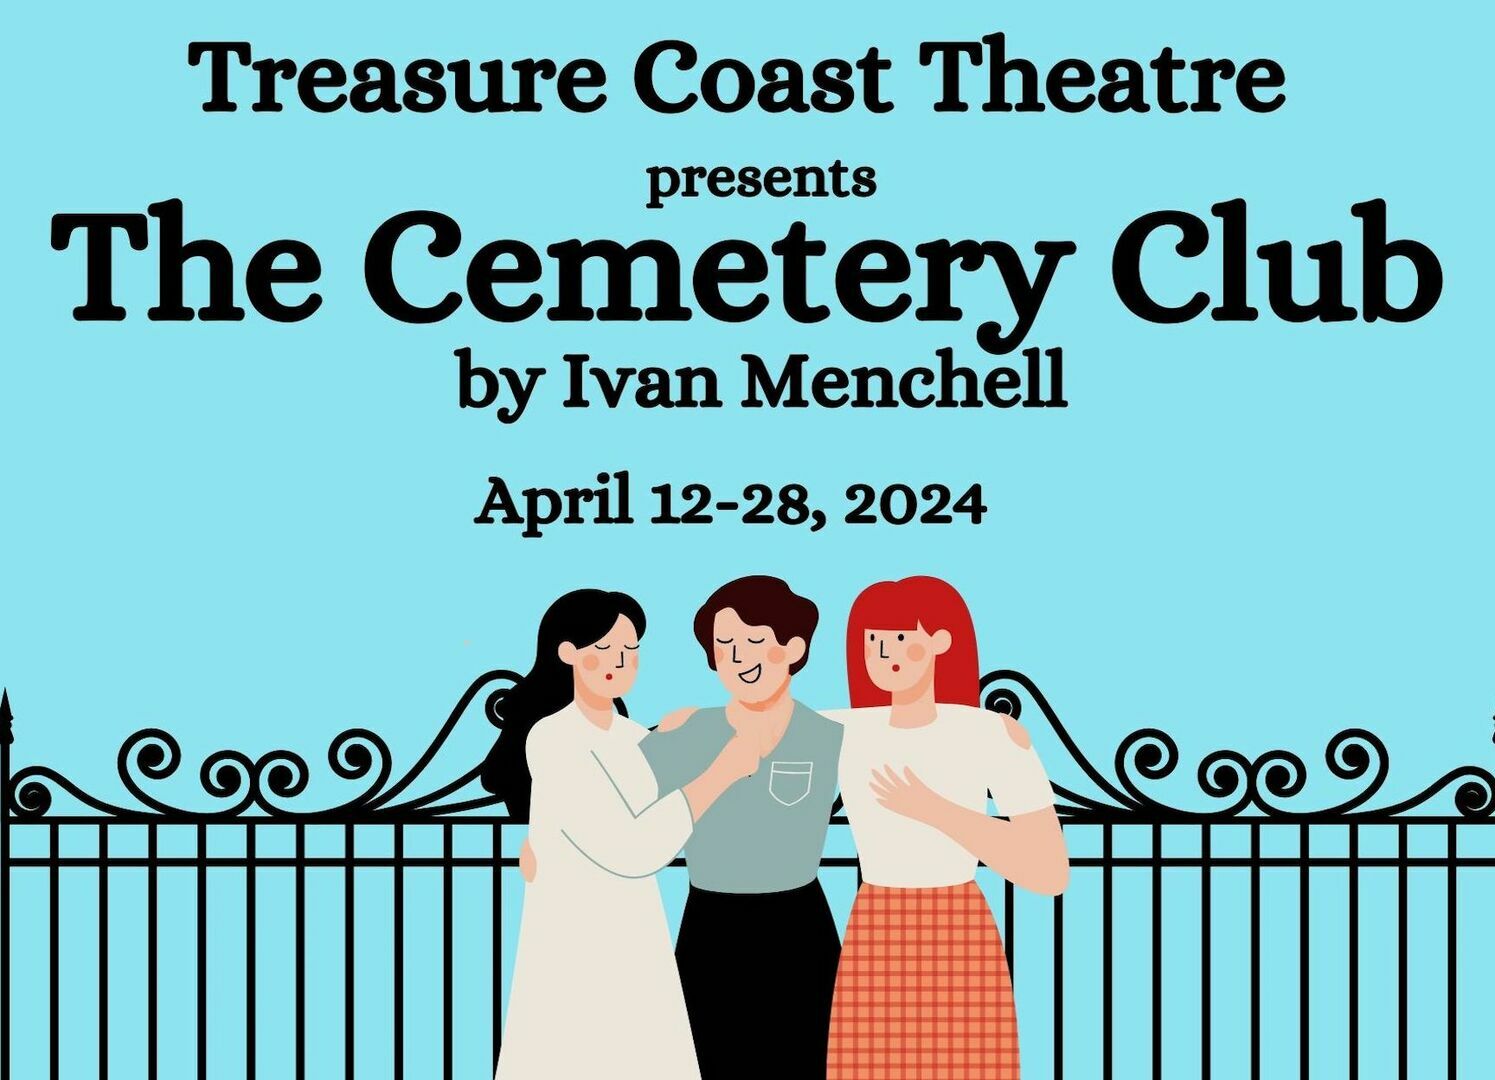 Treasure Coast Theatre presents the touching comedy "The Cemetery Club" by Ivan Menchell, Port St. Lucie, Florida, United States